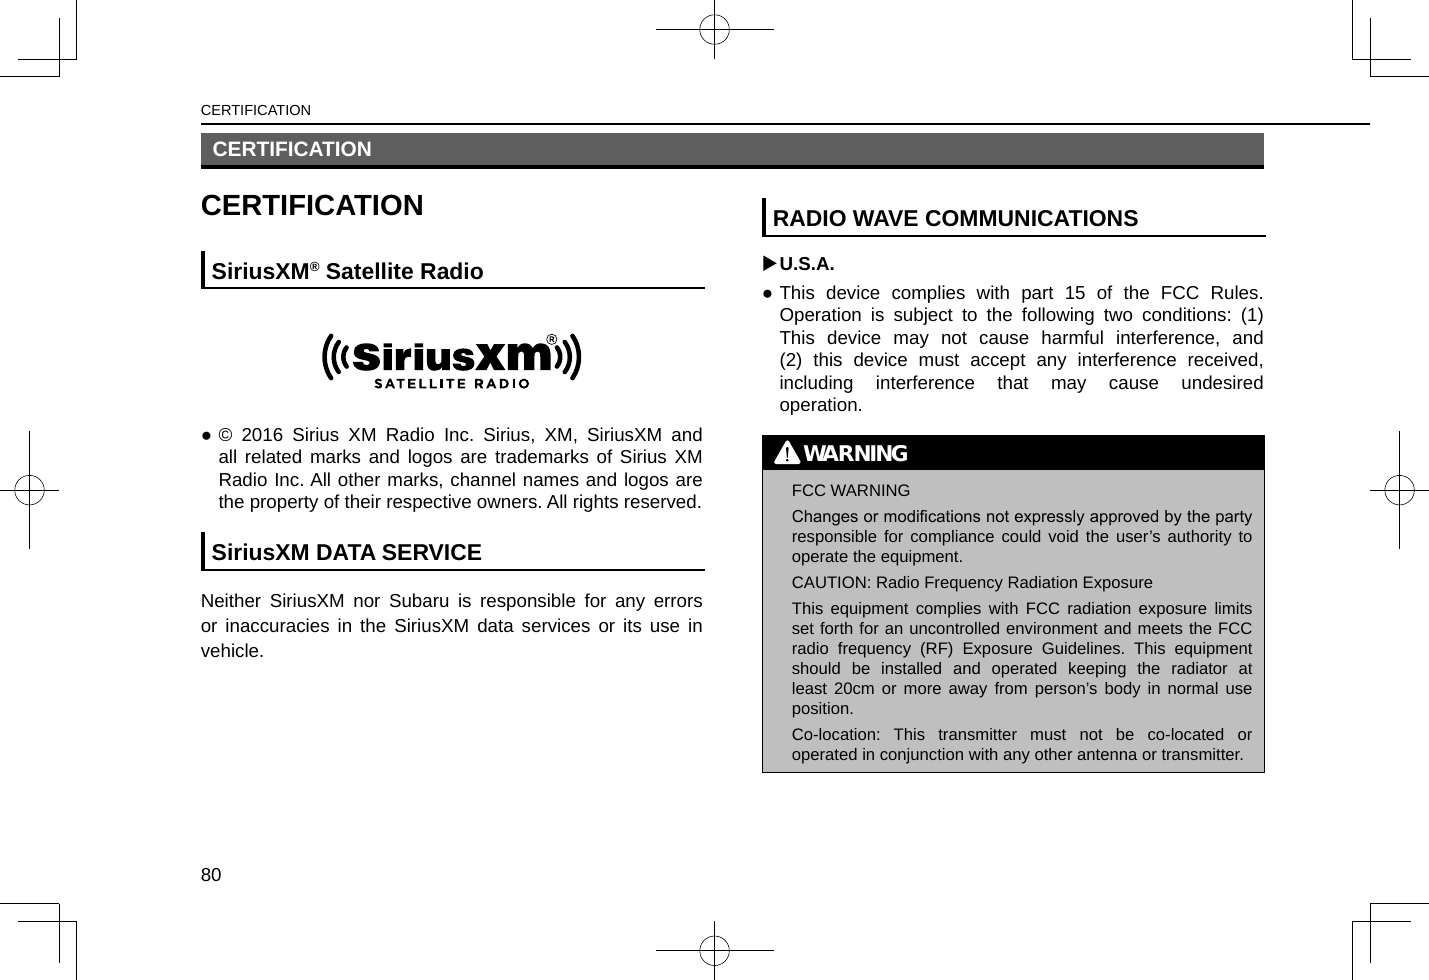 CERTIFICATIONCERTIFICATIONSiriusXM® Satellite Radio ●© 2016 Sirius XM Radio Inc. Sirius, XM, SiriusXM and all related marks and logos are trademarks of Sirius XM Radio Inc. All other marks, channel names and logos are the property of their respective owners. All rights reserved.SiriusXM DATA SERVICENeither SiriusXM nor Subaru is responsible for any errors or inaccuracies in the SiriusXM data services or its use in vehicle.RADIO WAVE COMMUNICATIONS XU.S.A. ●This device complies with part 15 of the FCC Rules. Operation is subject to the following two conditions: (1) This device may not cause harmful interference, and (2) this device must accept any interference received, including interference that may cause undesired operation.WARNING lFCC WARNINGChanges or modications not expressly approved by the party responsible for compliance could void the user’s authority to operate the equipment. lCAUTION: Radio Frequency Radiation ExposureThis equipment complies with FCC radiation exposure limits set forth for an uncontrolled environment and meets the FCC radio frequency (RF) Exposure Guidelines. This equipment should be installed and operated keeping the radiator at least 20cm or more away from person’s body in normal use position. lCo-location: This transmitter must not be co-located or operated in conjunction with any other antenna or transmitter.CERTIFICATION80